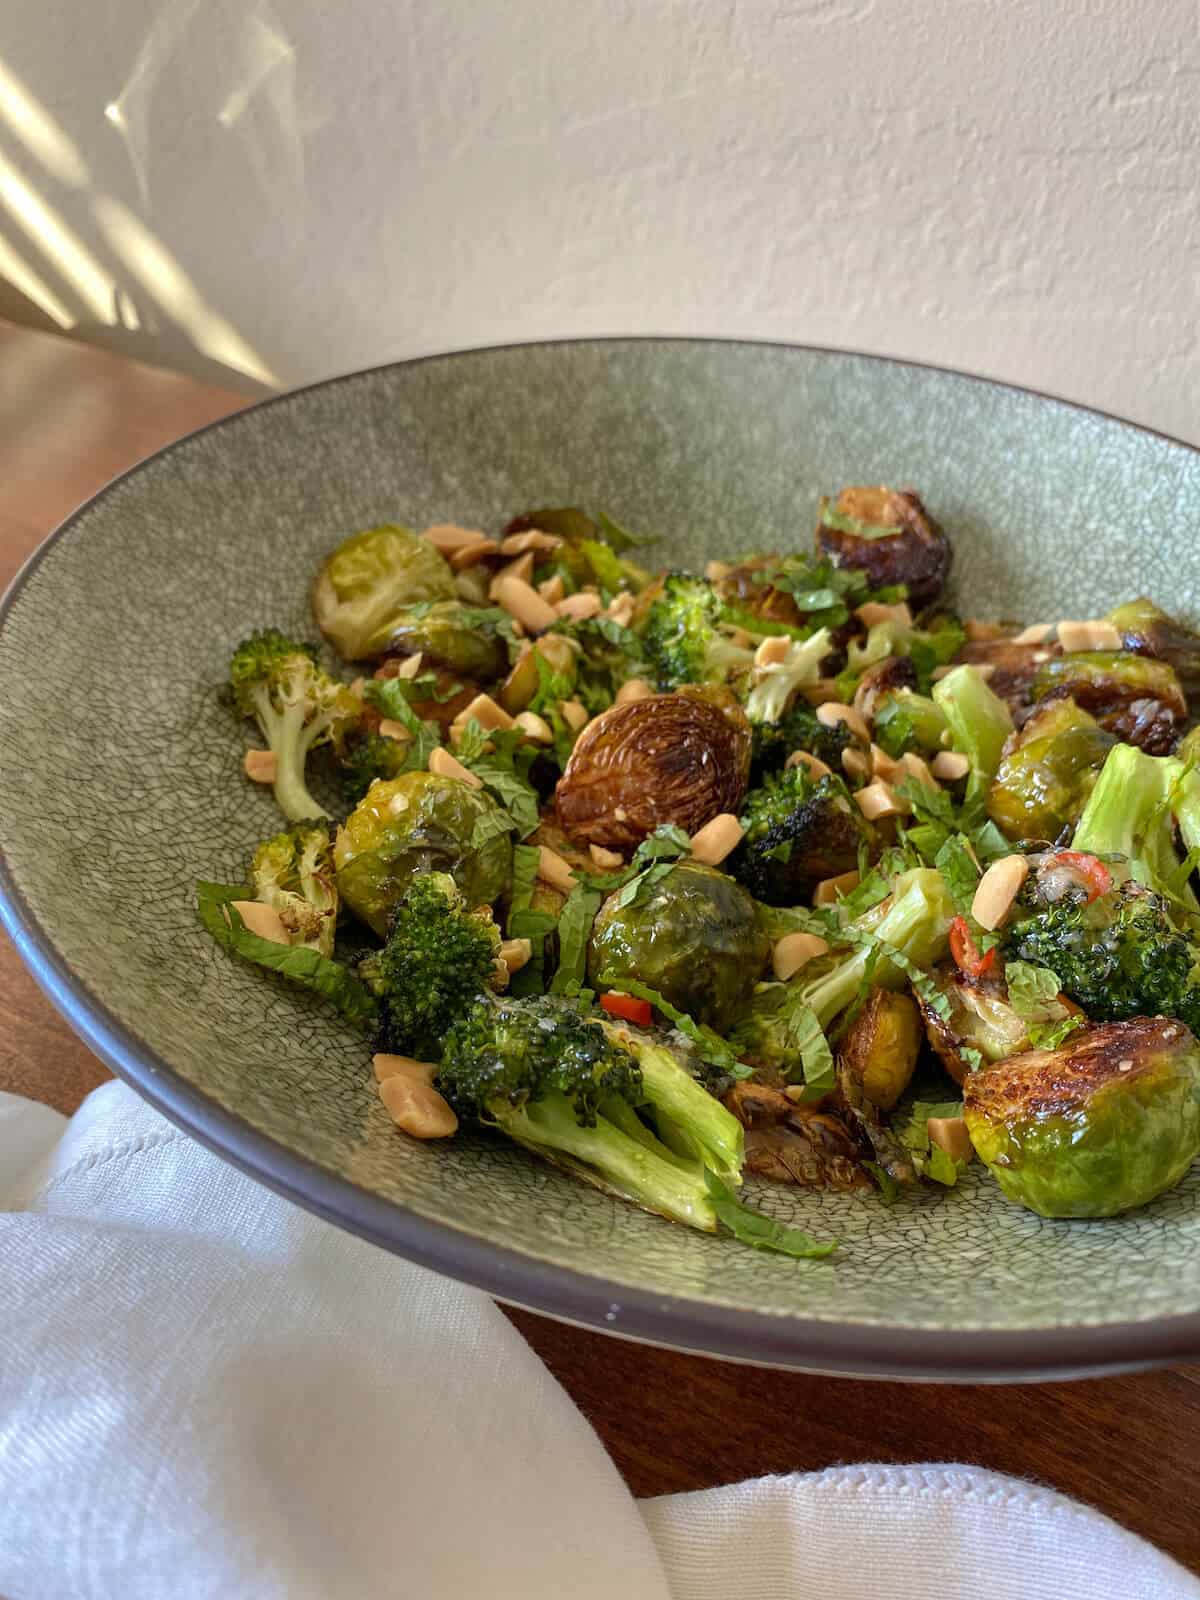 A bowl of charred brussel sprouts and broccoli salad with peanuts 